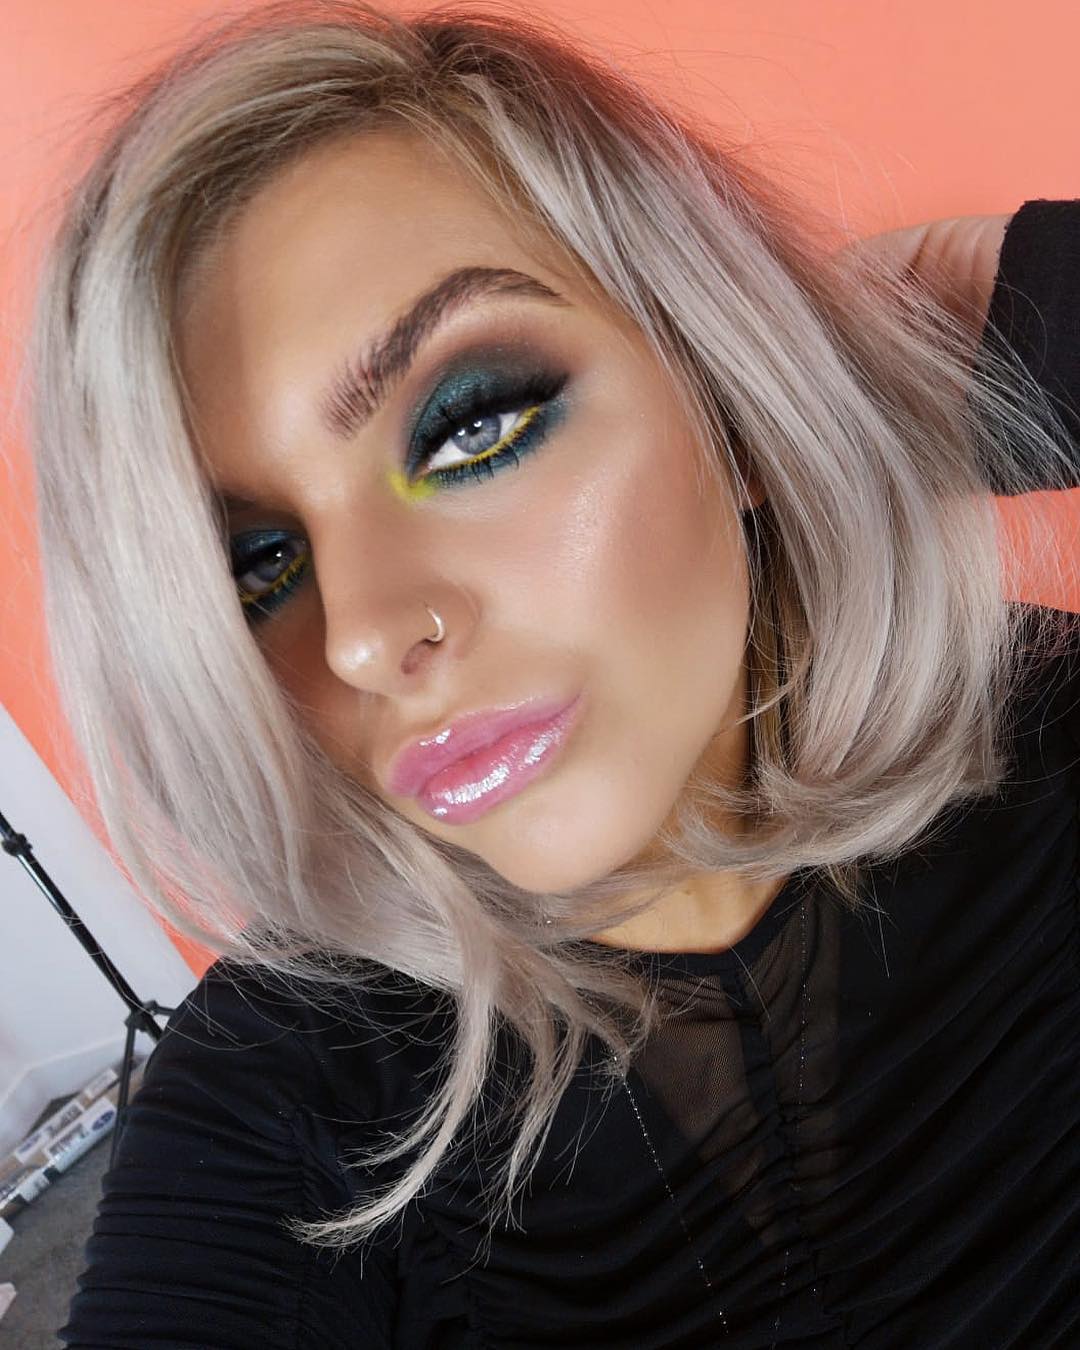 gøre det muligt for legeplads korrekt BEAUTY BAY on Twitter: "BRAND NEW VID 🚨 Our gal Lucy Hart smashin' yet  another look using ALL Linda Hallberg Cosmetics🙌 Head over to our YT  channel to get this dreaaamy green